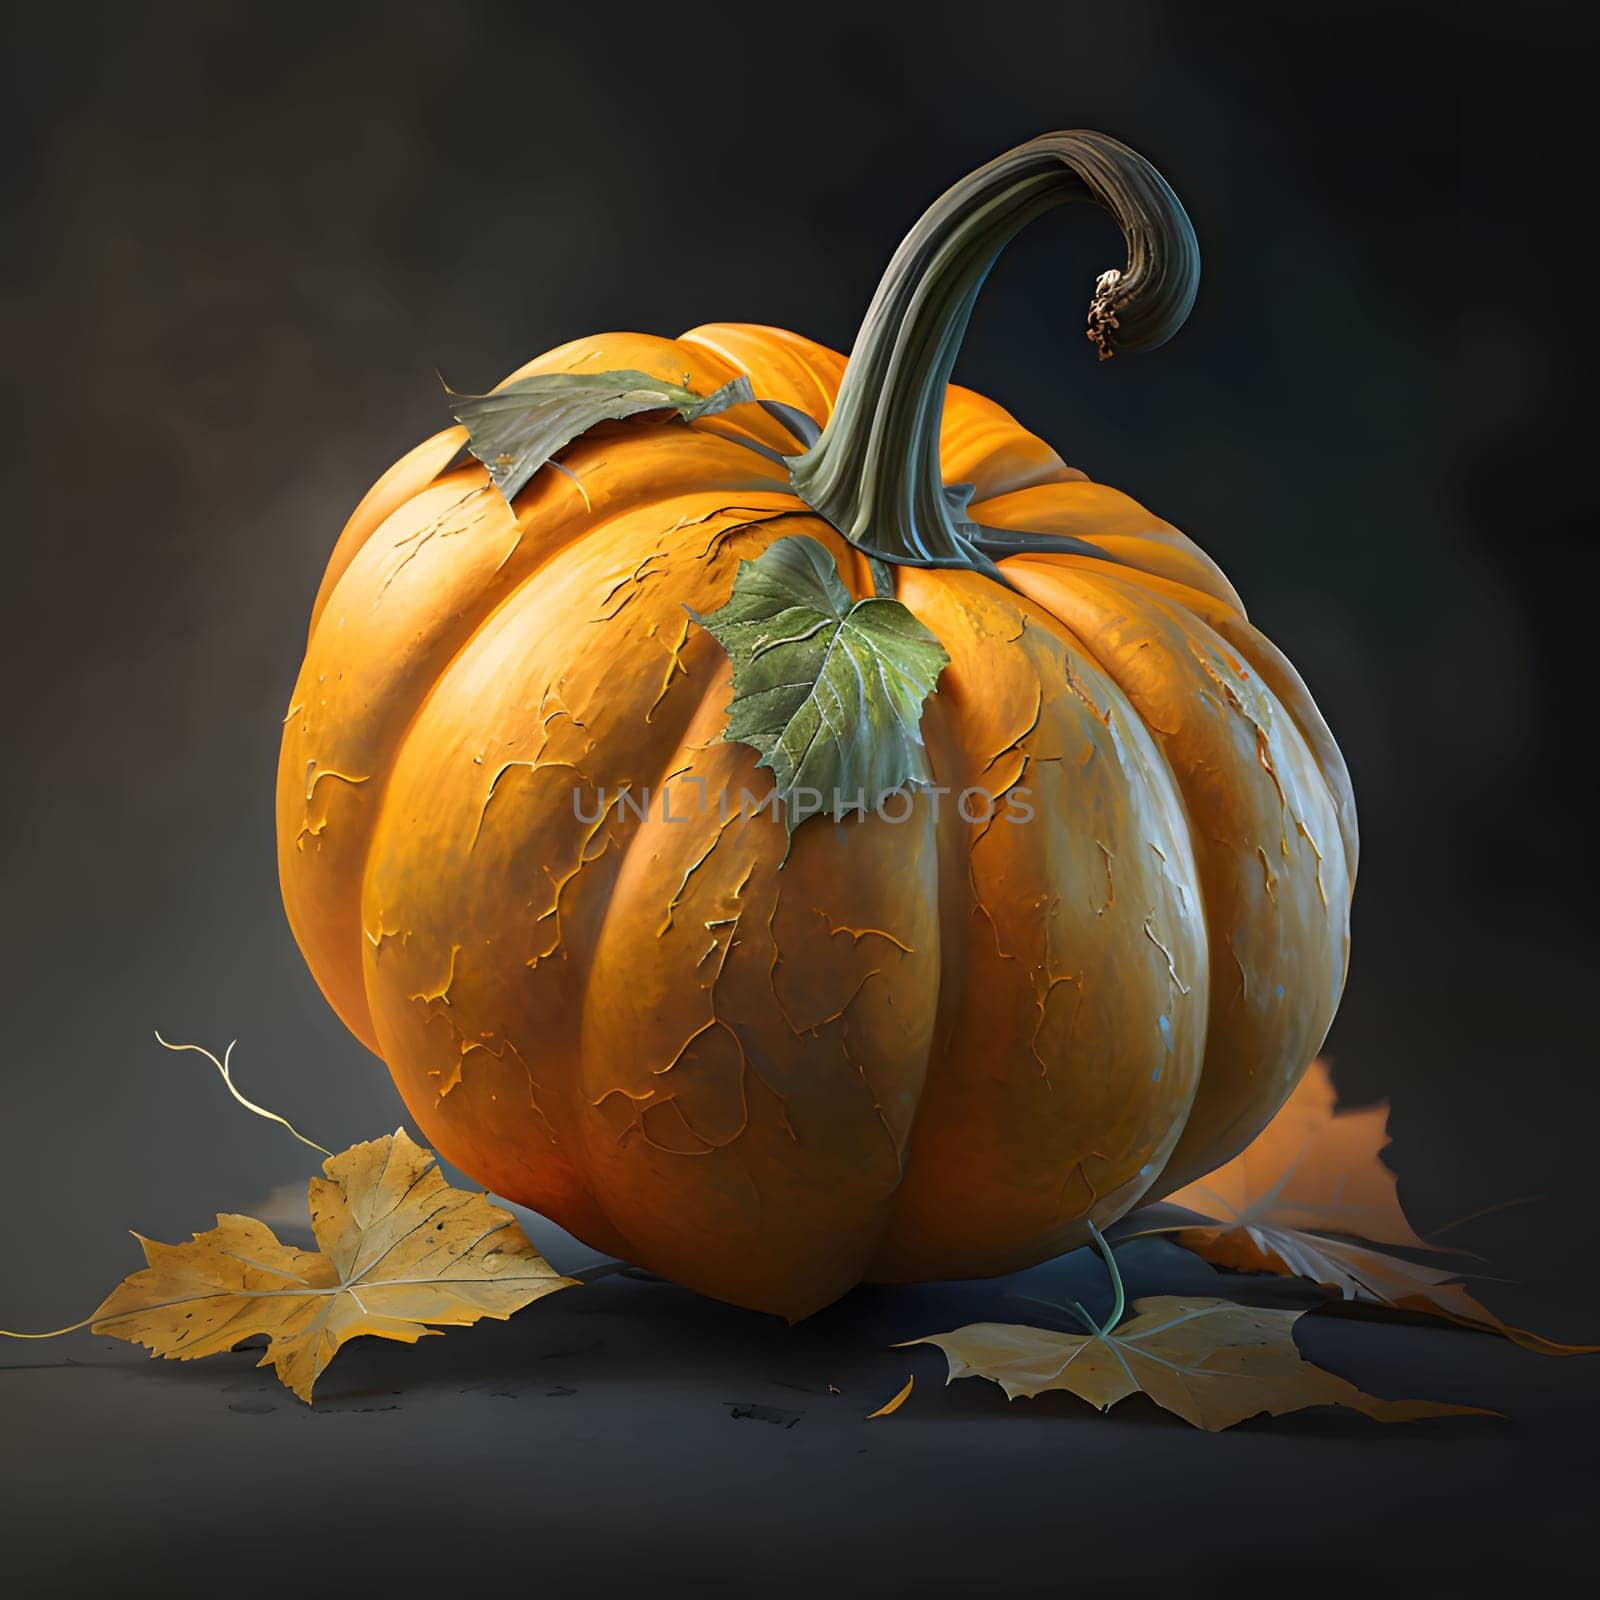 Pumpkin with leaves on a dark background. Pumpkin as a dish of thanksgiving for the harvest. by ThemesS